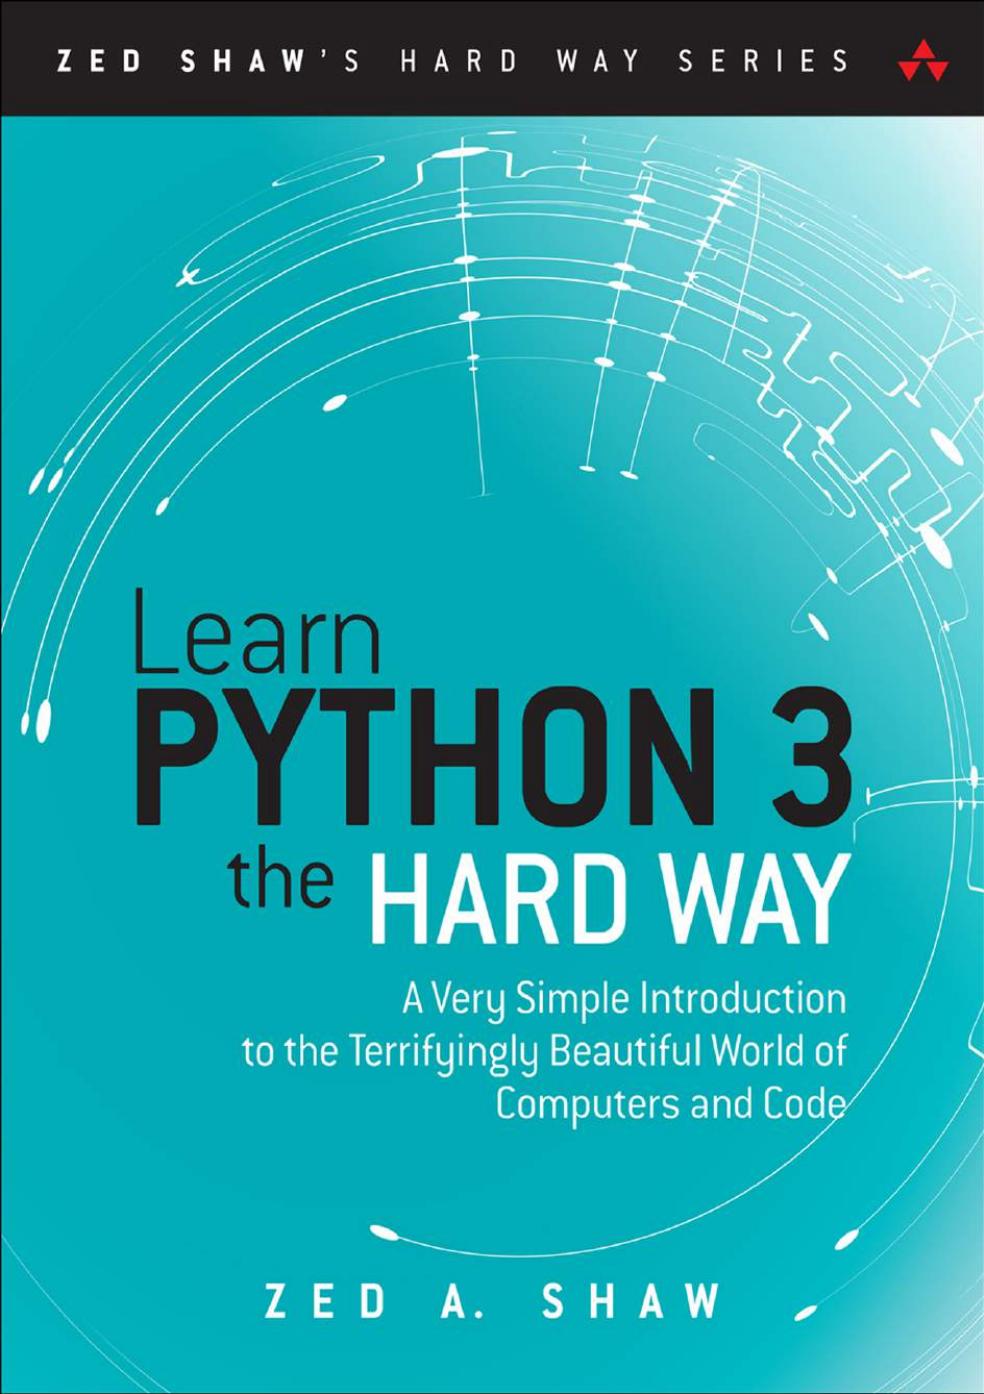 Learn Python 3 The Hard Way: A Very Simple Introduction to the Terrifyingly Beautiful World of Computers and Code